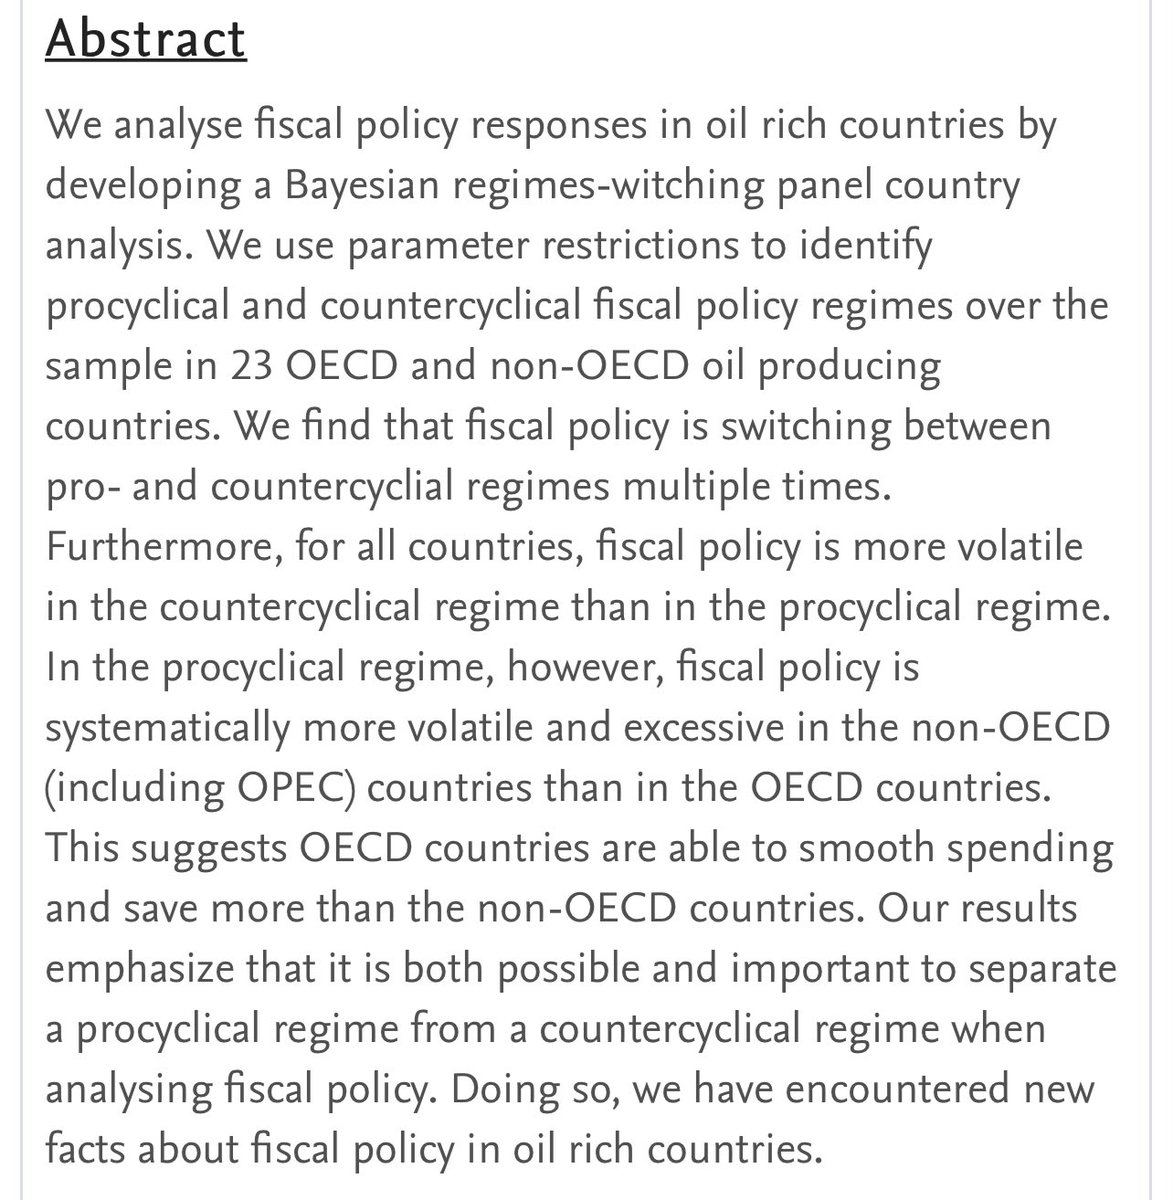 Oil and Fiscal Policy Regimes (2021) https://papers.ssrn.com/sol3/papers.cfm?abstract_id=3769785“Our results emphasize that it is both possible and important to separate a procyclical regime from a countercyclical regime when analysing fiscal policy.”